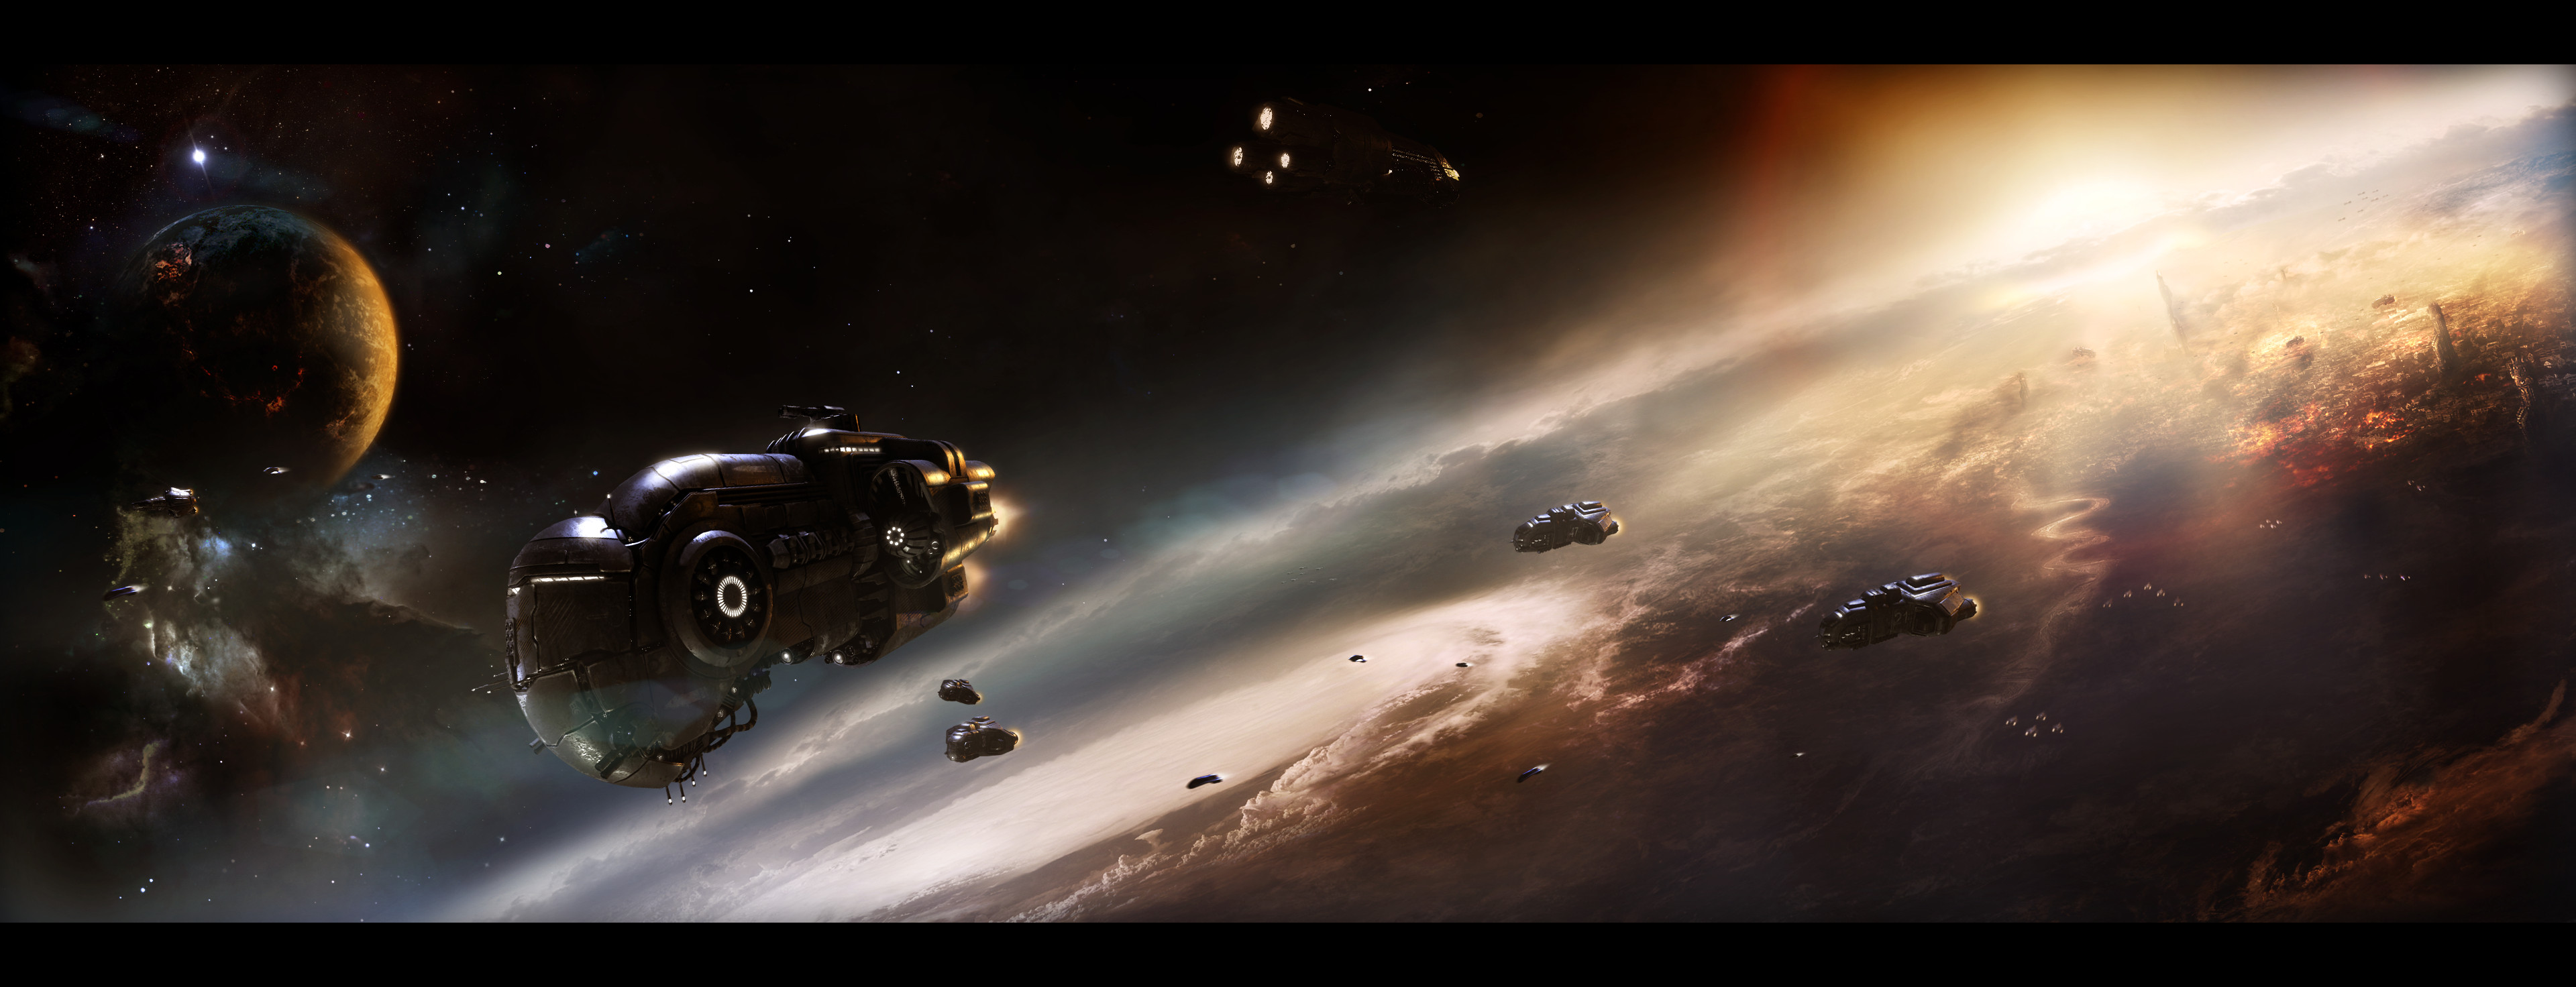 Science Fiction High Tech Space Planet Sun Spaceship Sky Stars Storm Clouds 3840x1472